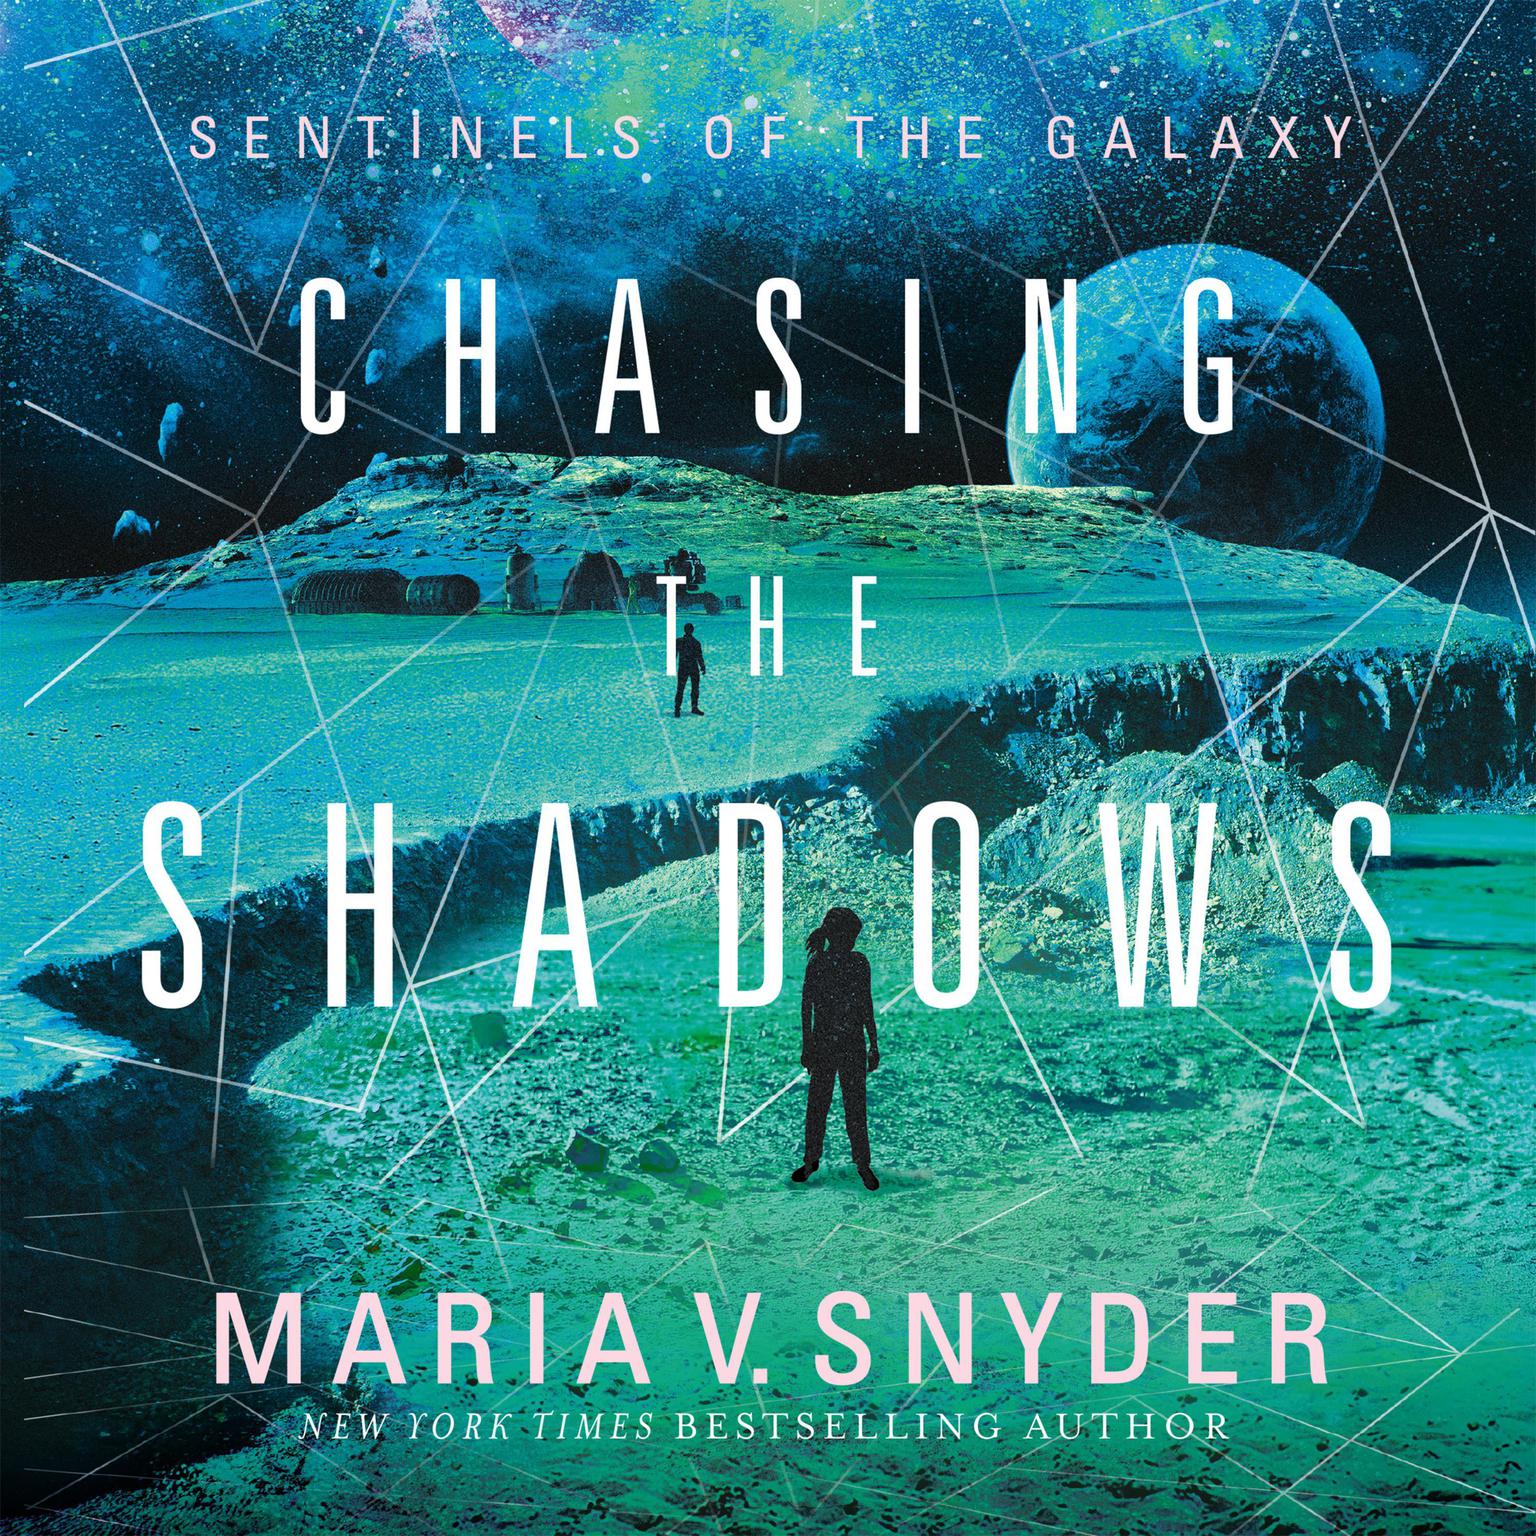 Chasing The Shadows Audiobook, by Maria V. Snyder